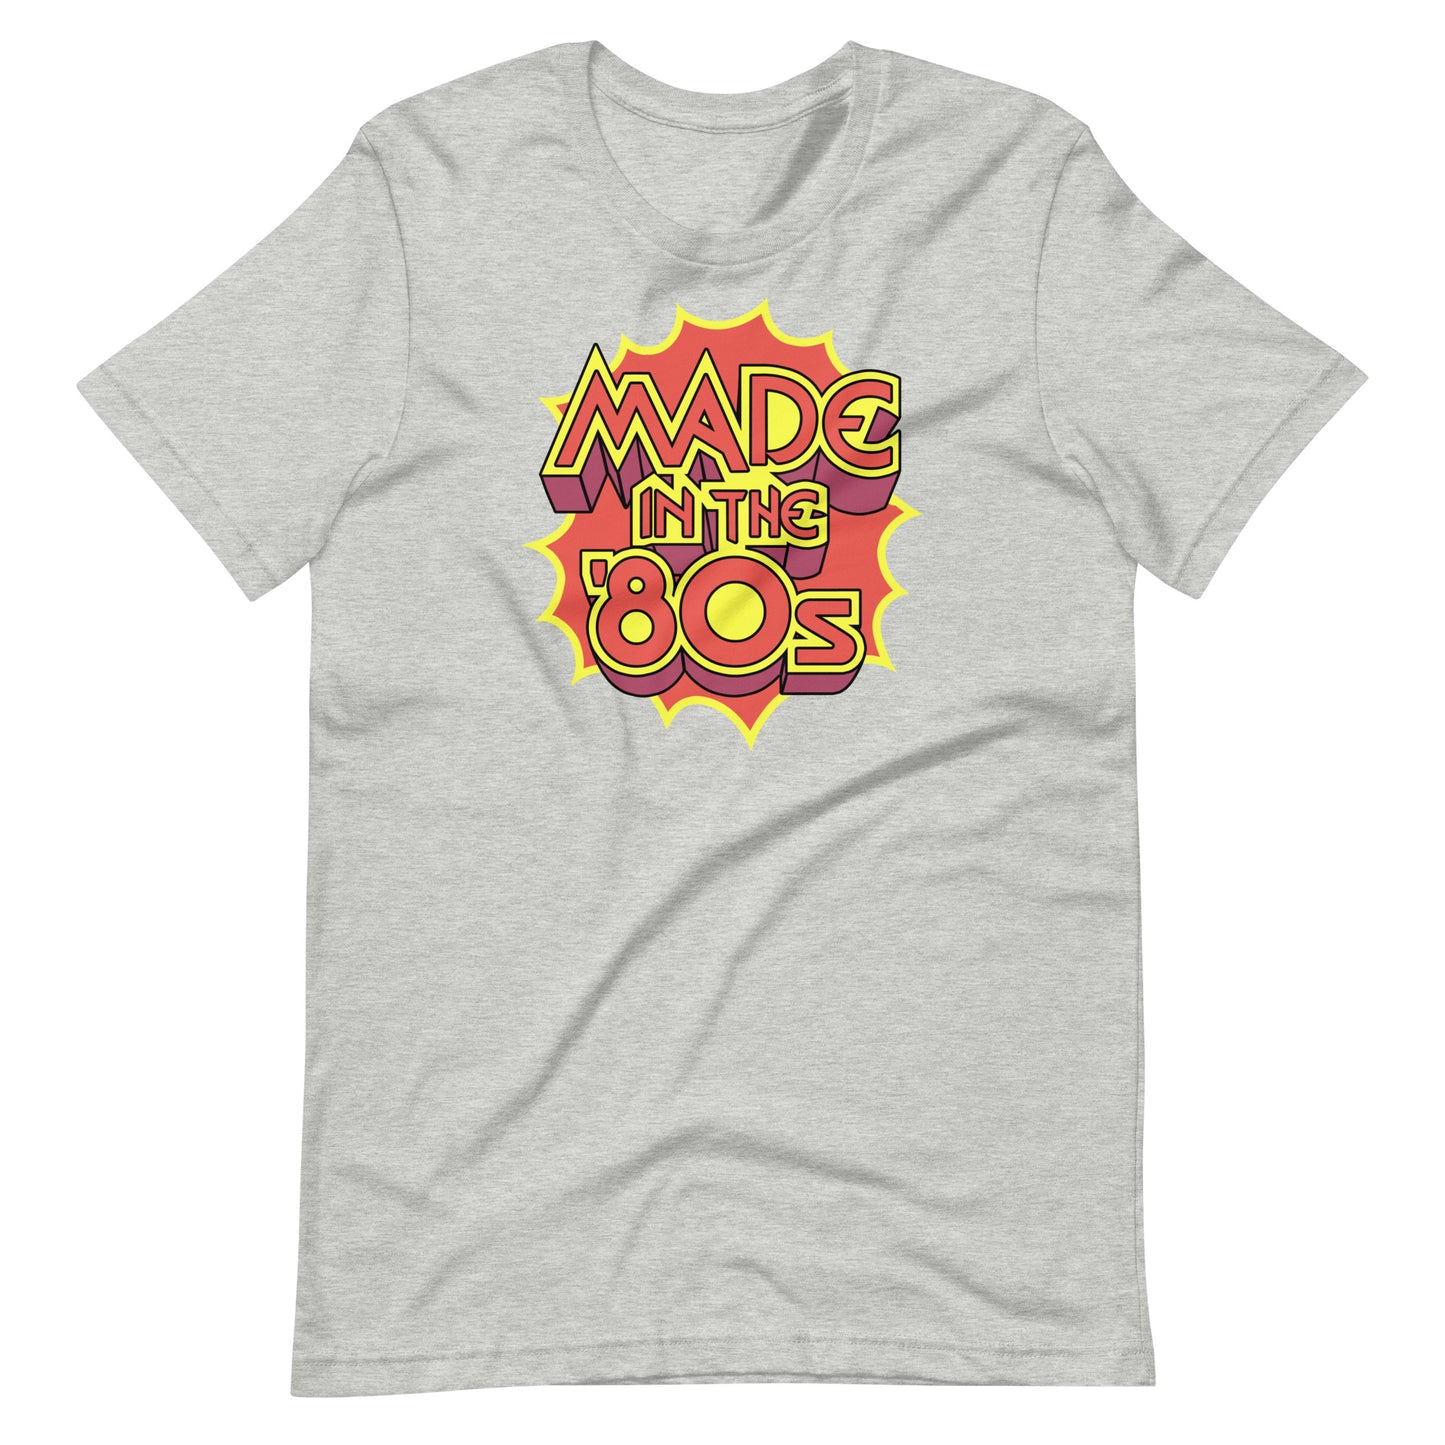 Made in the '80s PoP t-shirt